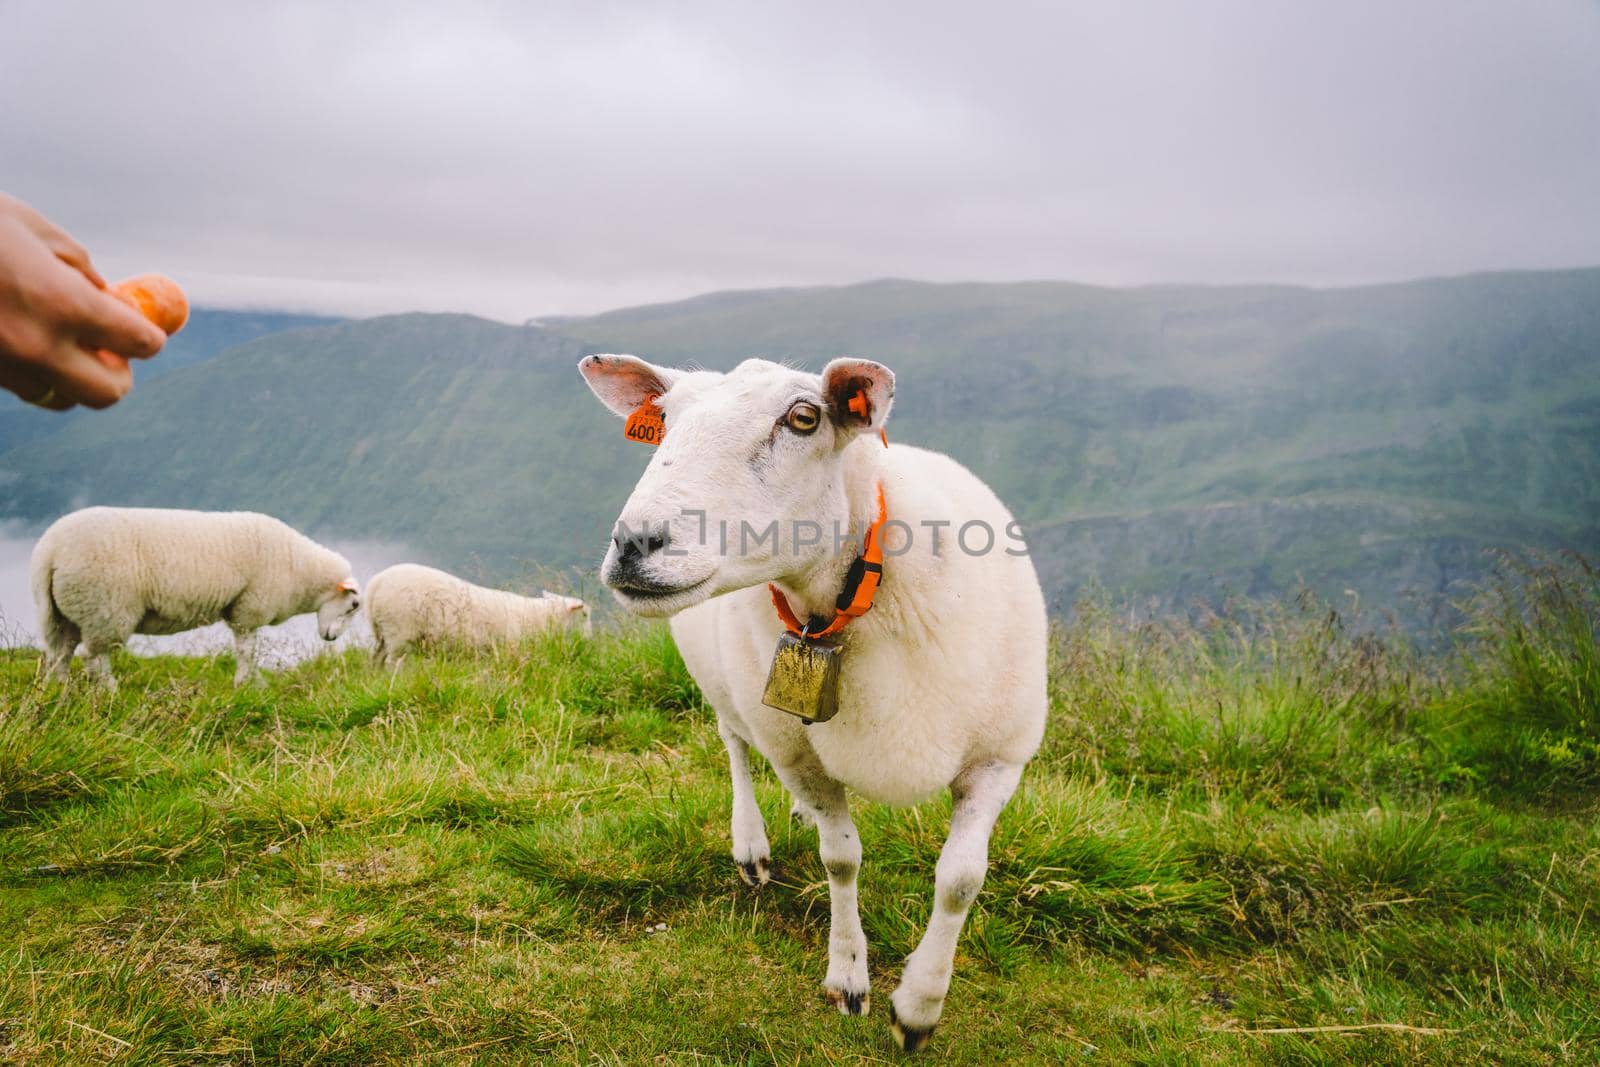 sheeps on a mountain farm on a cloudy day. A woman feeds a sheep in the mountains of norway. A tourist gives food to a sheep. Idyllic landscape of sheep farm in Norway. Content Sheep, in Norway by Tomashevska